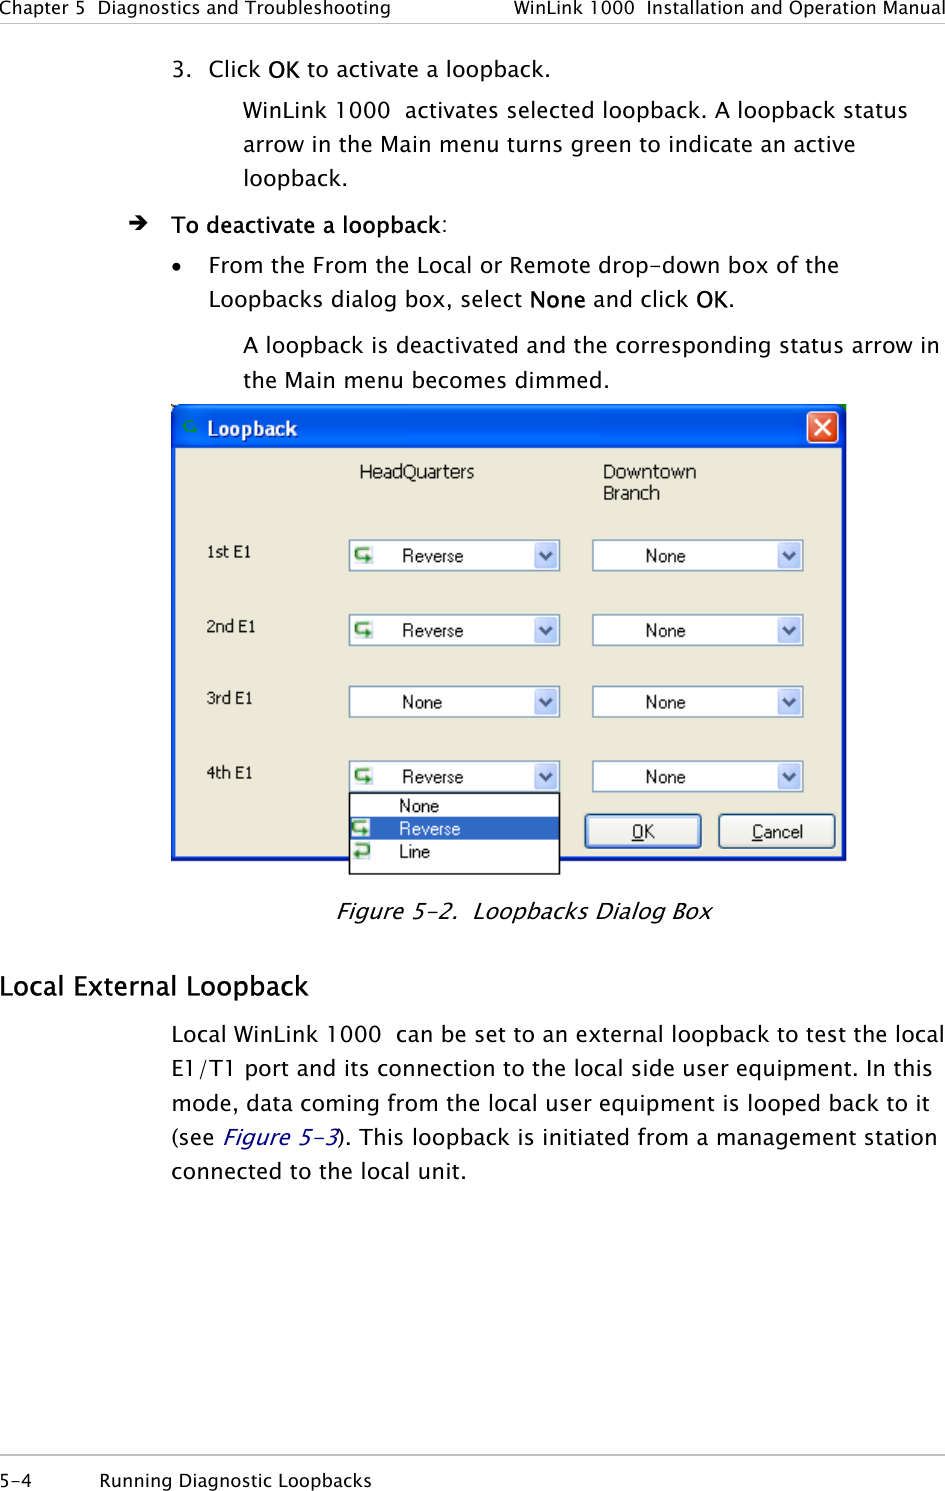 Chapter  5  Diagnostics and Troubleshooting  WinLink 1000  Installation and Operation Manual 5-4 Running Diagnostic Loopbacks  3. Click OK to activate a loopback. WinLink 1000  activates selected loopback. A loopback status arrow in the Main menu turns green to indicate an active loopback.  Î To deactivate a loopback: • From the From the Local or Remote drop-down box of the Loopbacks dialog box, select None and click OK. A loopback is deactivated and the corresponding status arrow in the Main menu becomes dimmed.  Figure  5-2.  Loopbacks Dialog Box Local External Loopback Local WinLink 1000  can be set to an external loopback to test the local E1/T1 port and its connection to the local side user equipment. In this mode, data coming from the local user equipment is looped back to it (see Figure  5-3). This loopback is initiated from a management station connected to the local unit. 